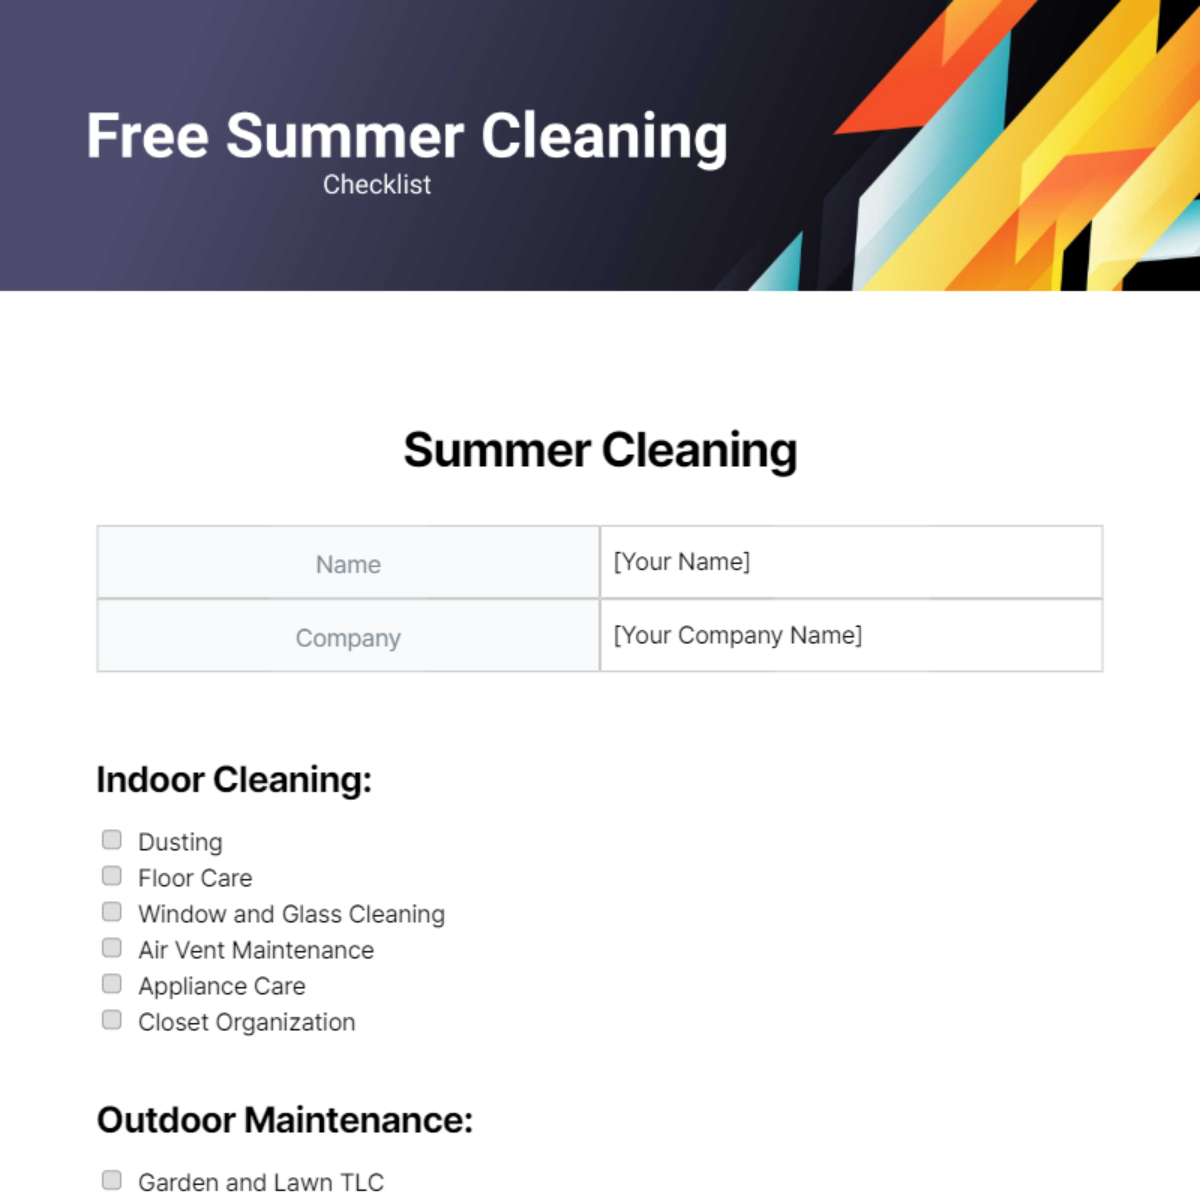 Free Summer Cleaning Checklist Template 